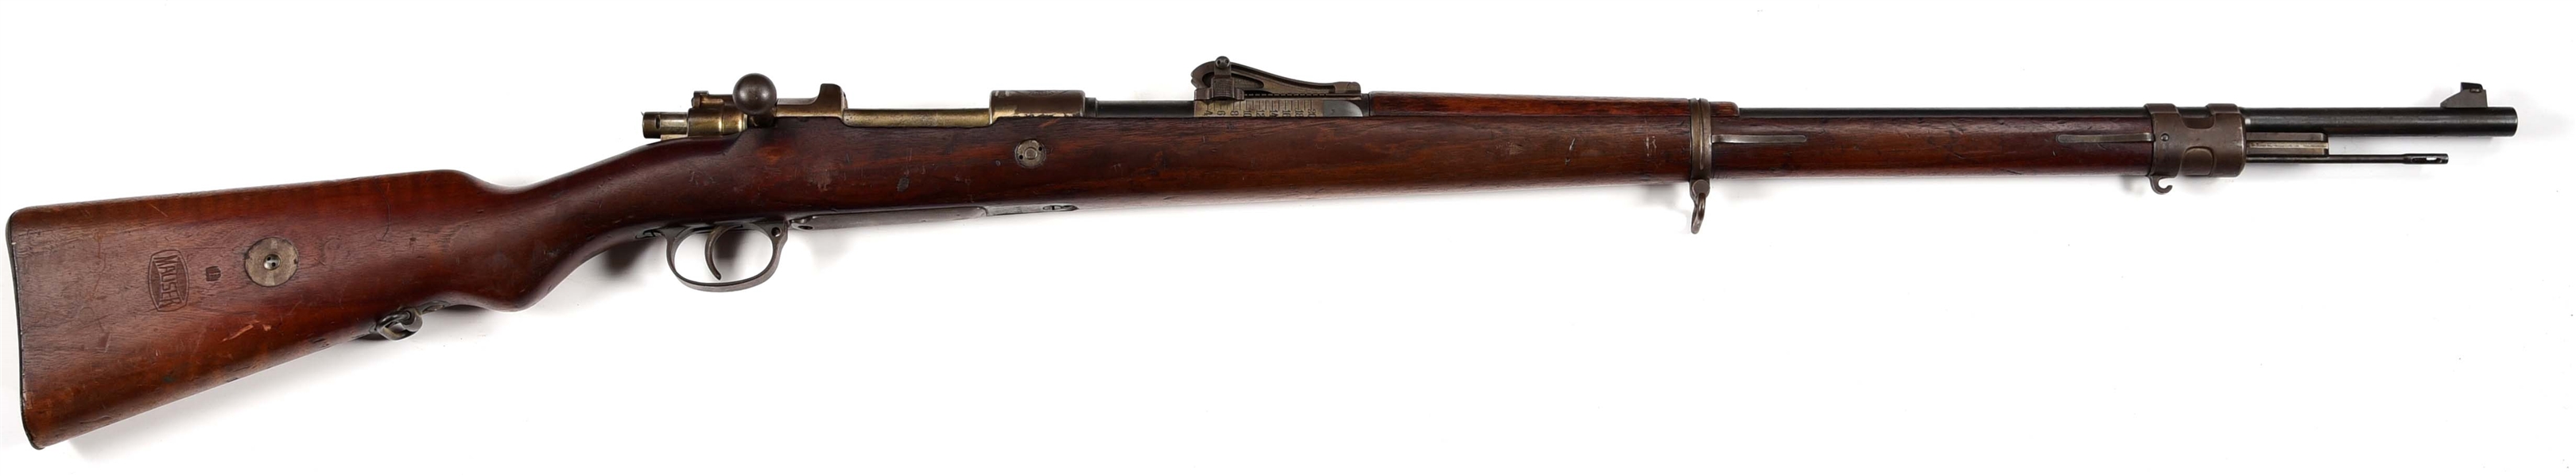 (C) PERUVIAN CONTRACT MAUSER MODEL 1909 BOLT ACTION RIFLE.